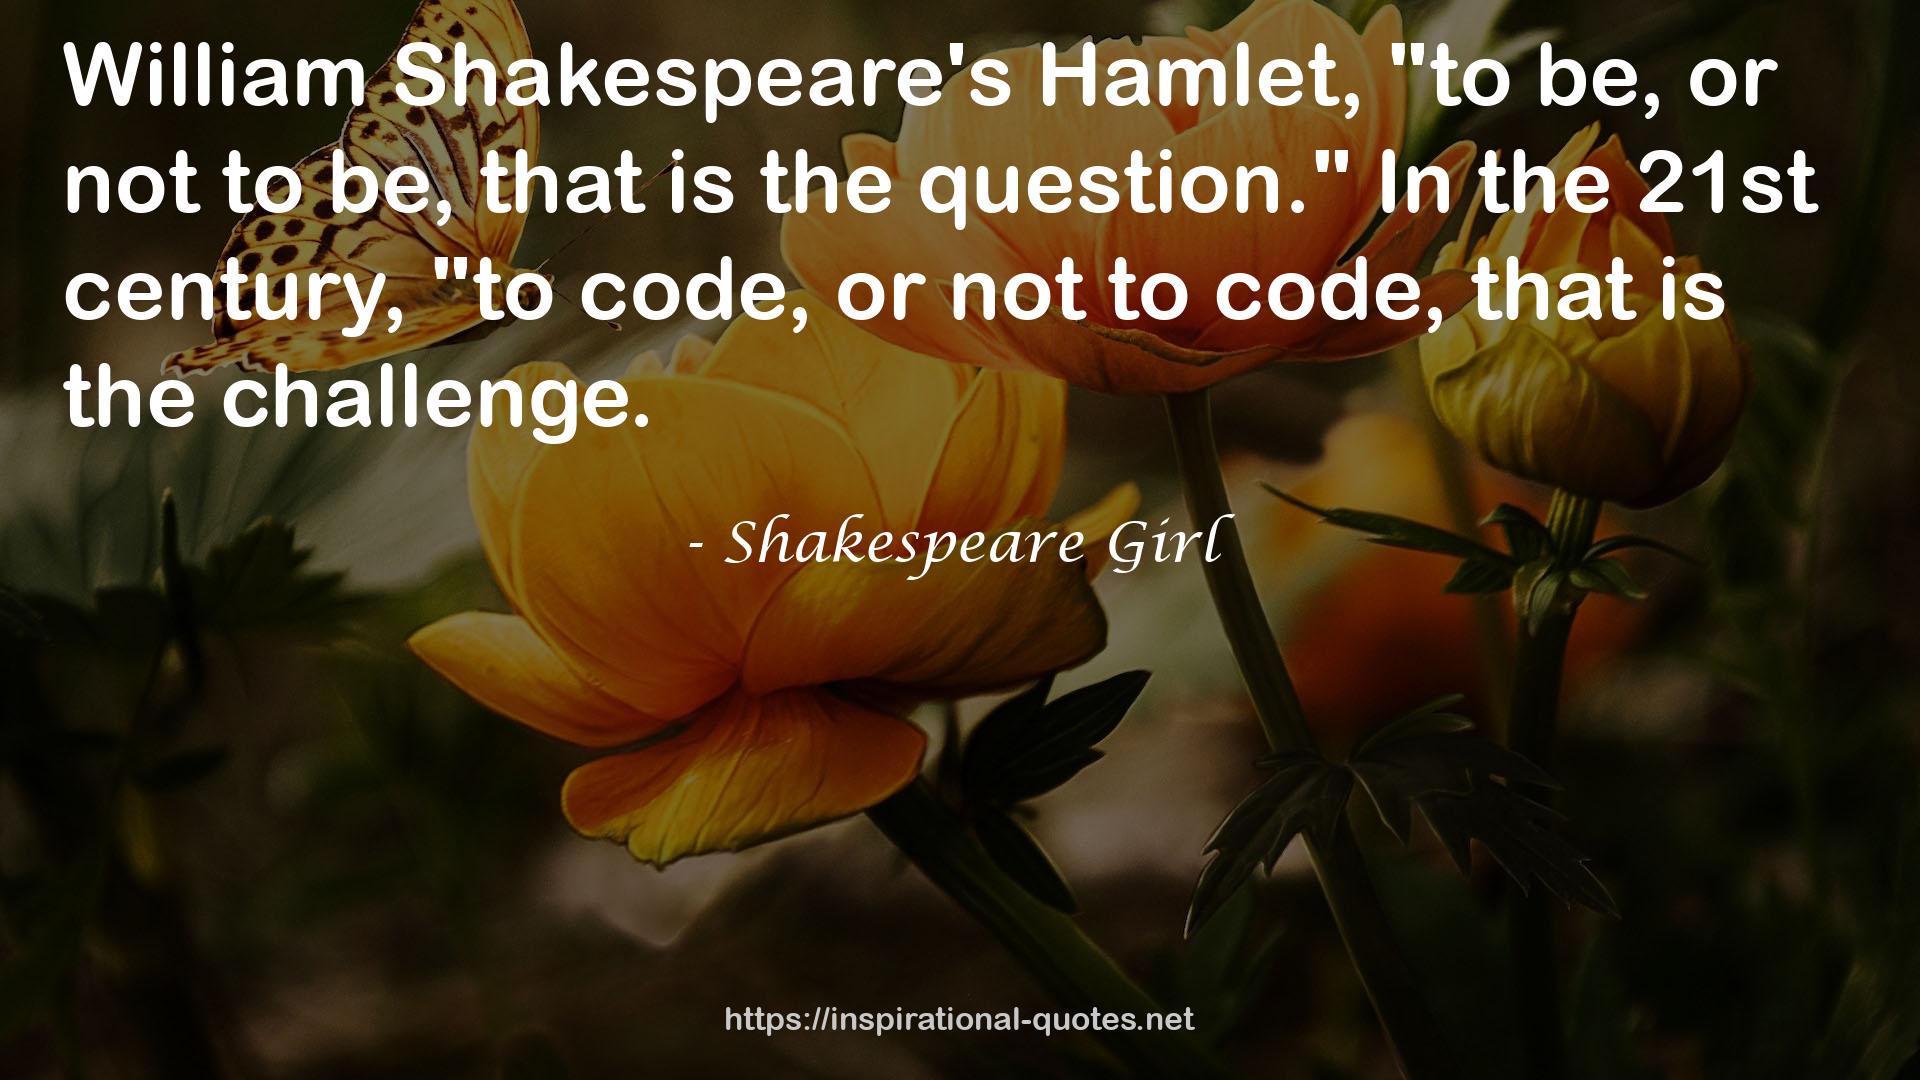 Shakespeare Girl QUOTES